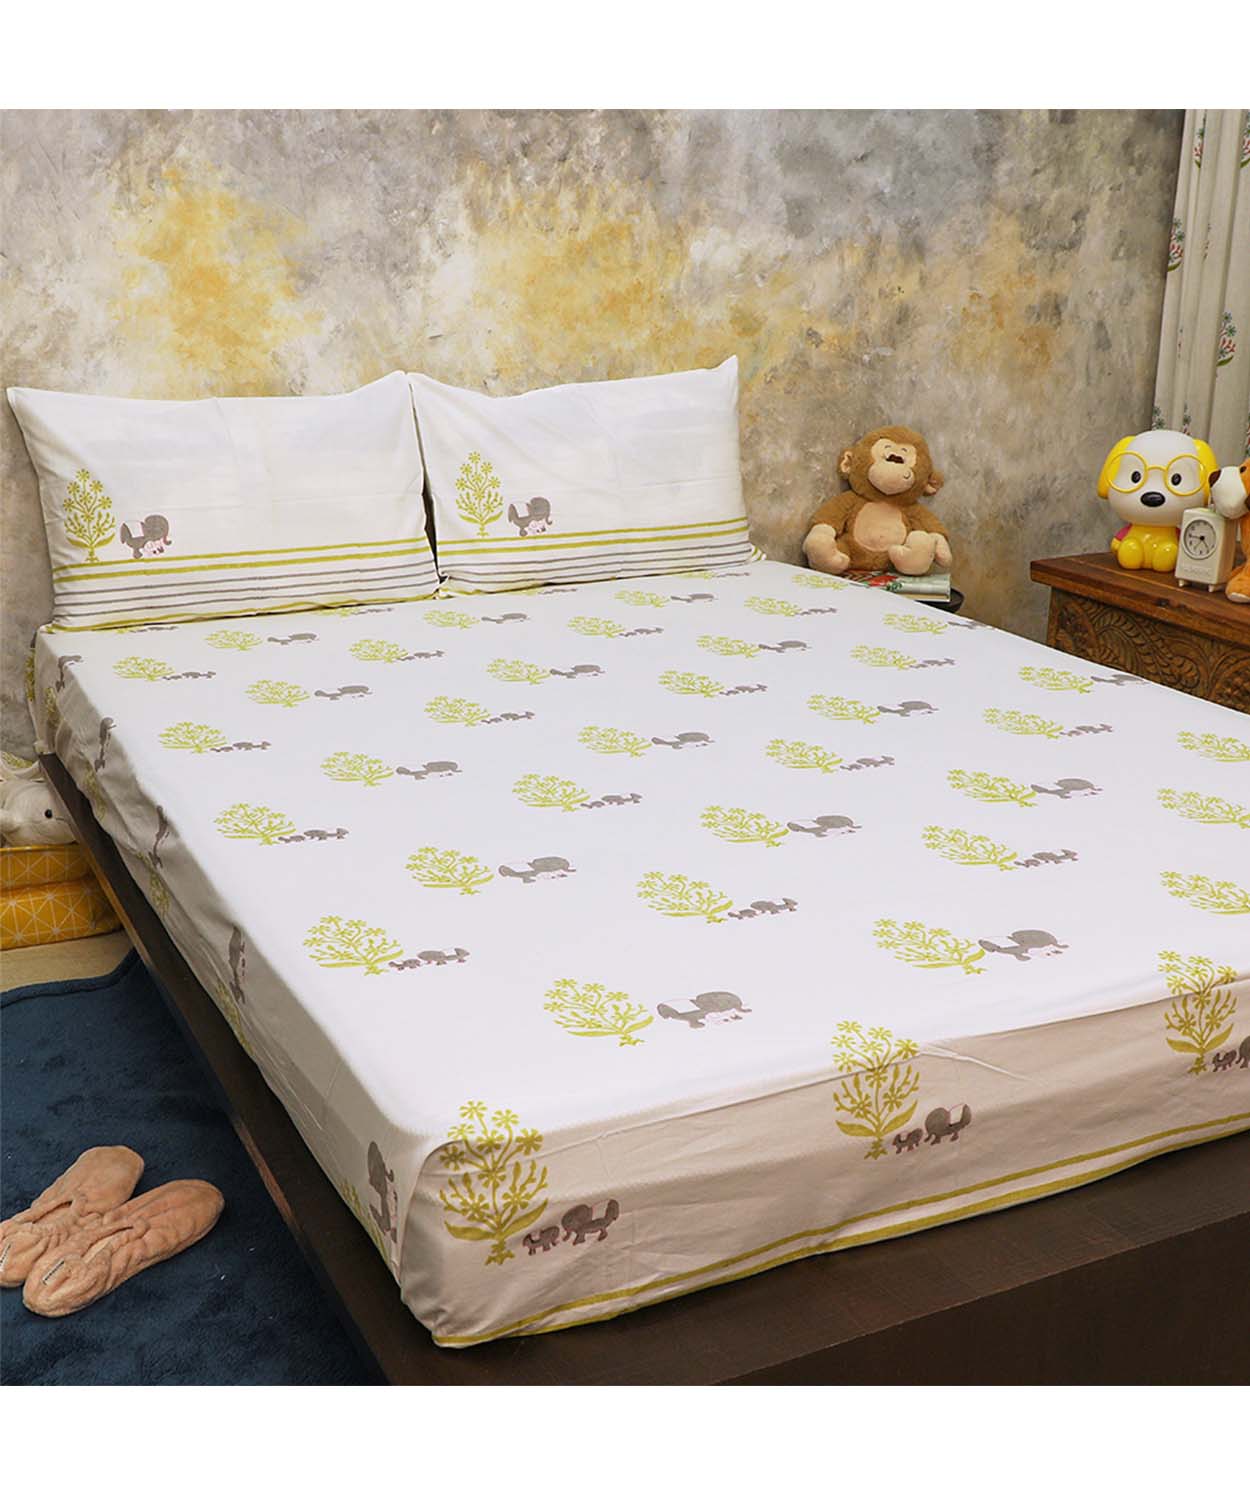 The Adventures Of Mamma & Me King Bed Set(Flat)